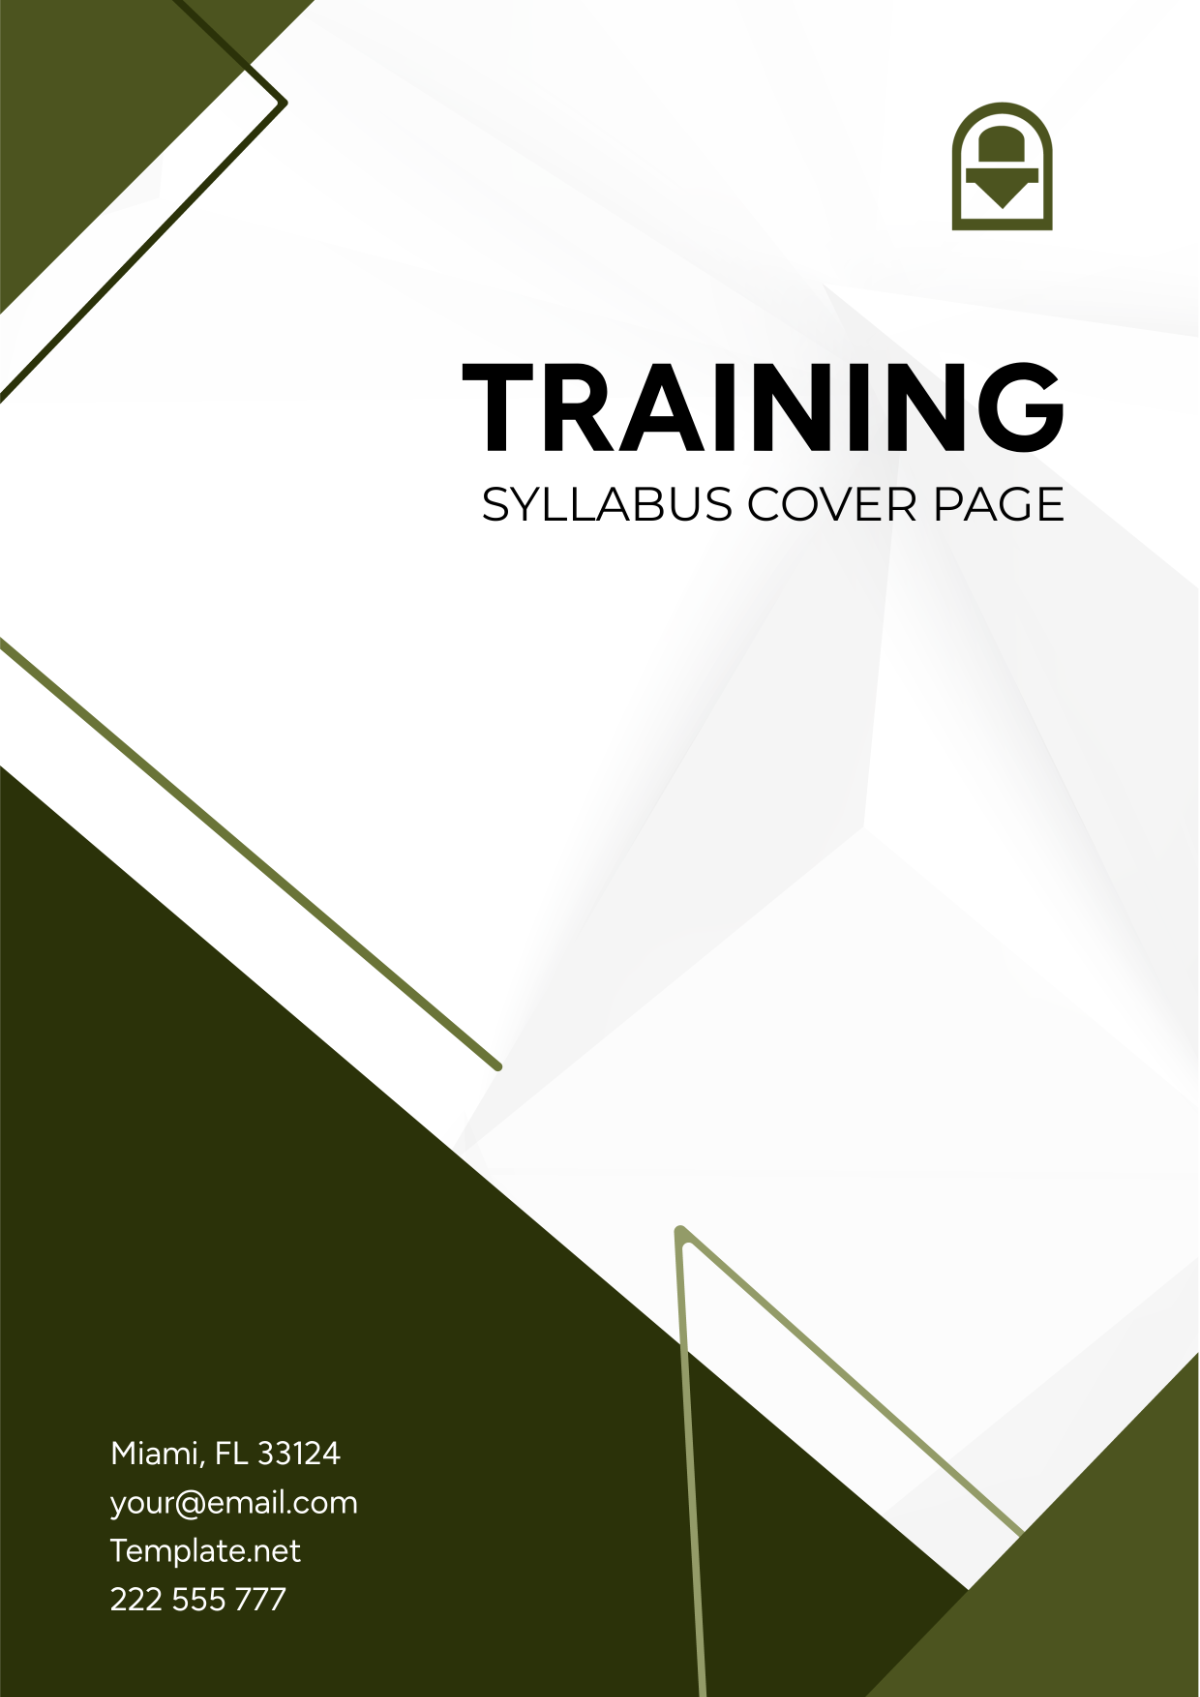 Training Syllabus Cover Page Template